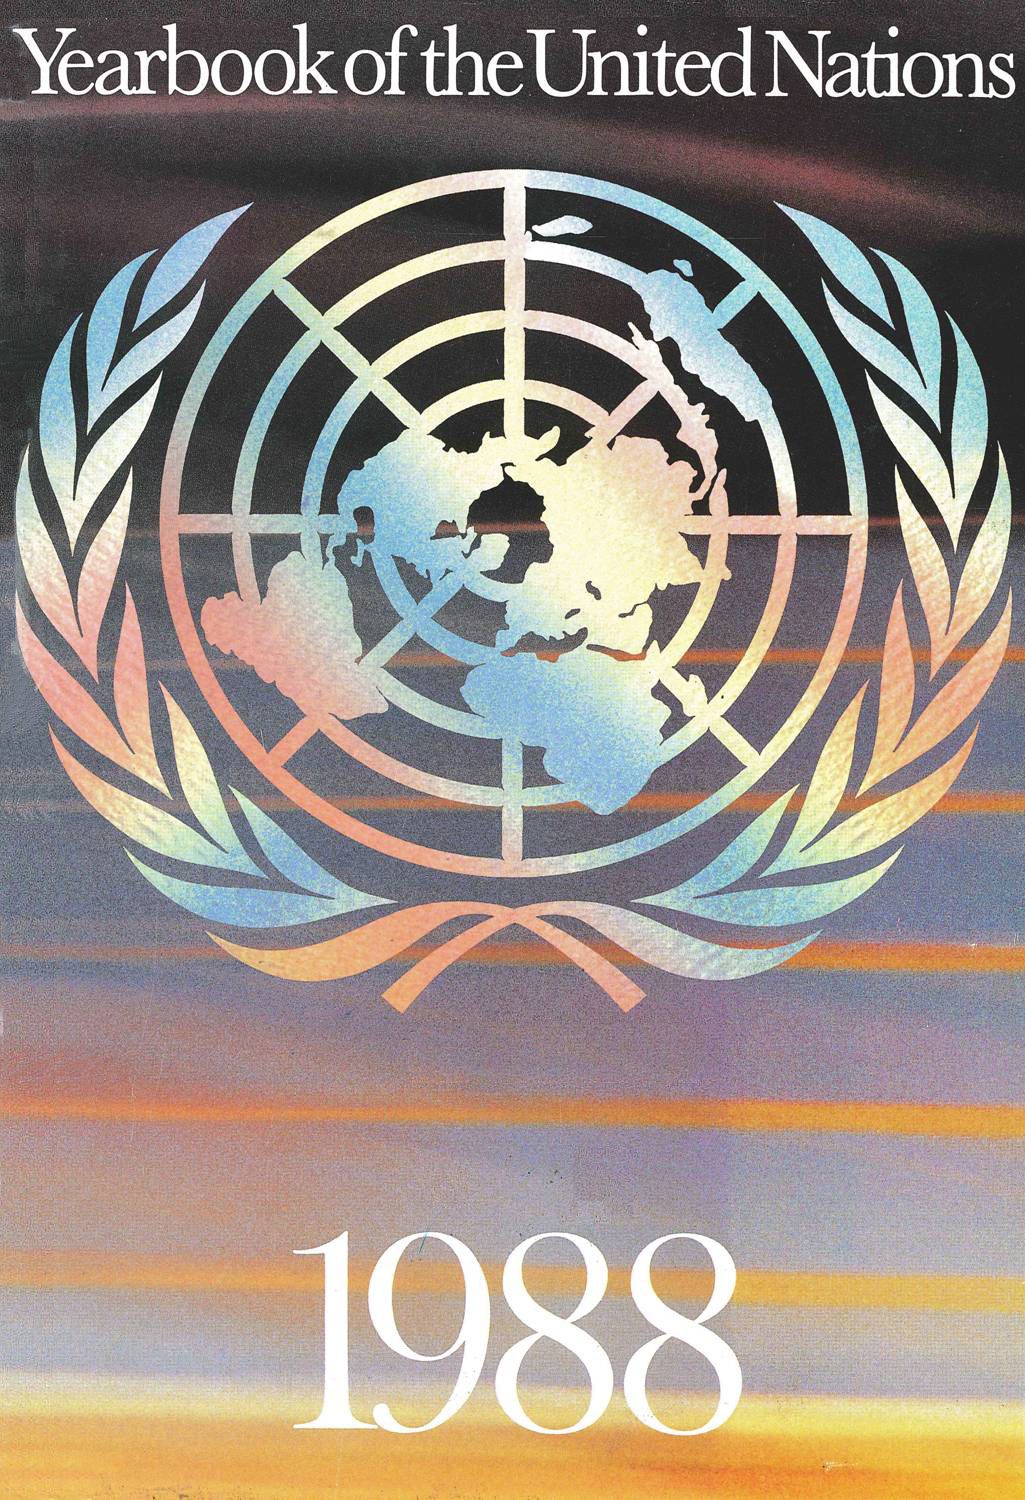 image of Yearbook of the United Nations 1988